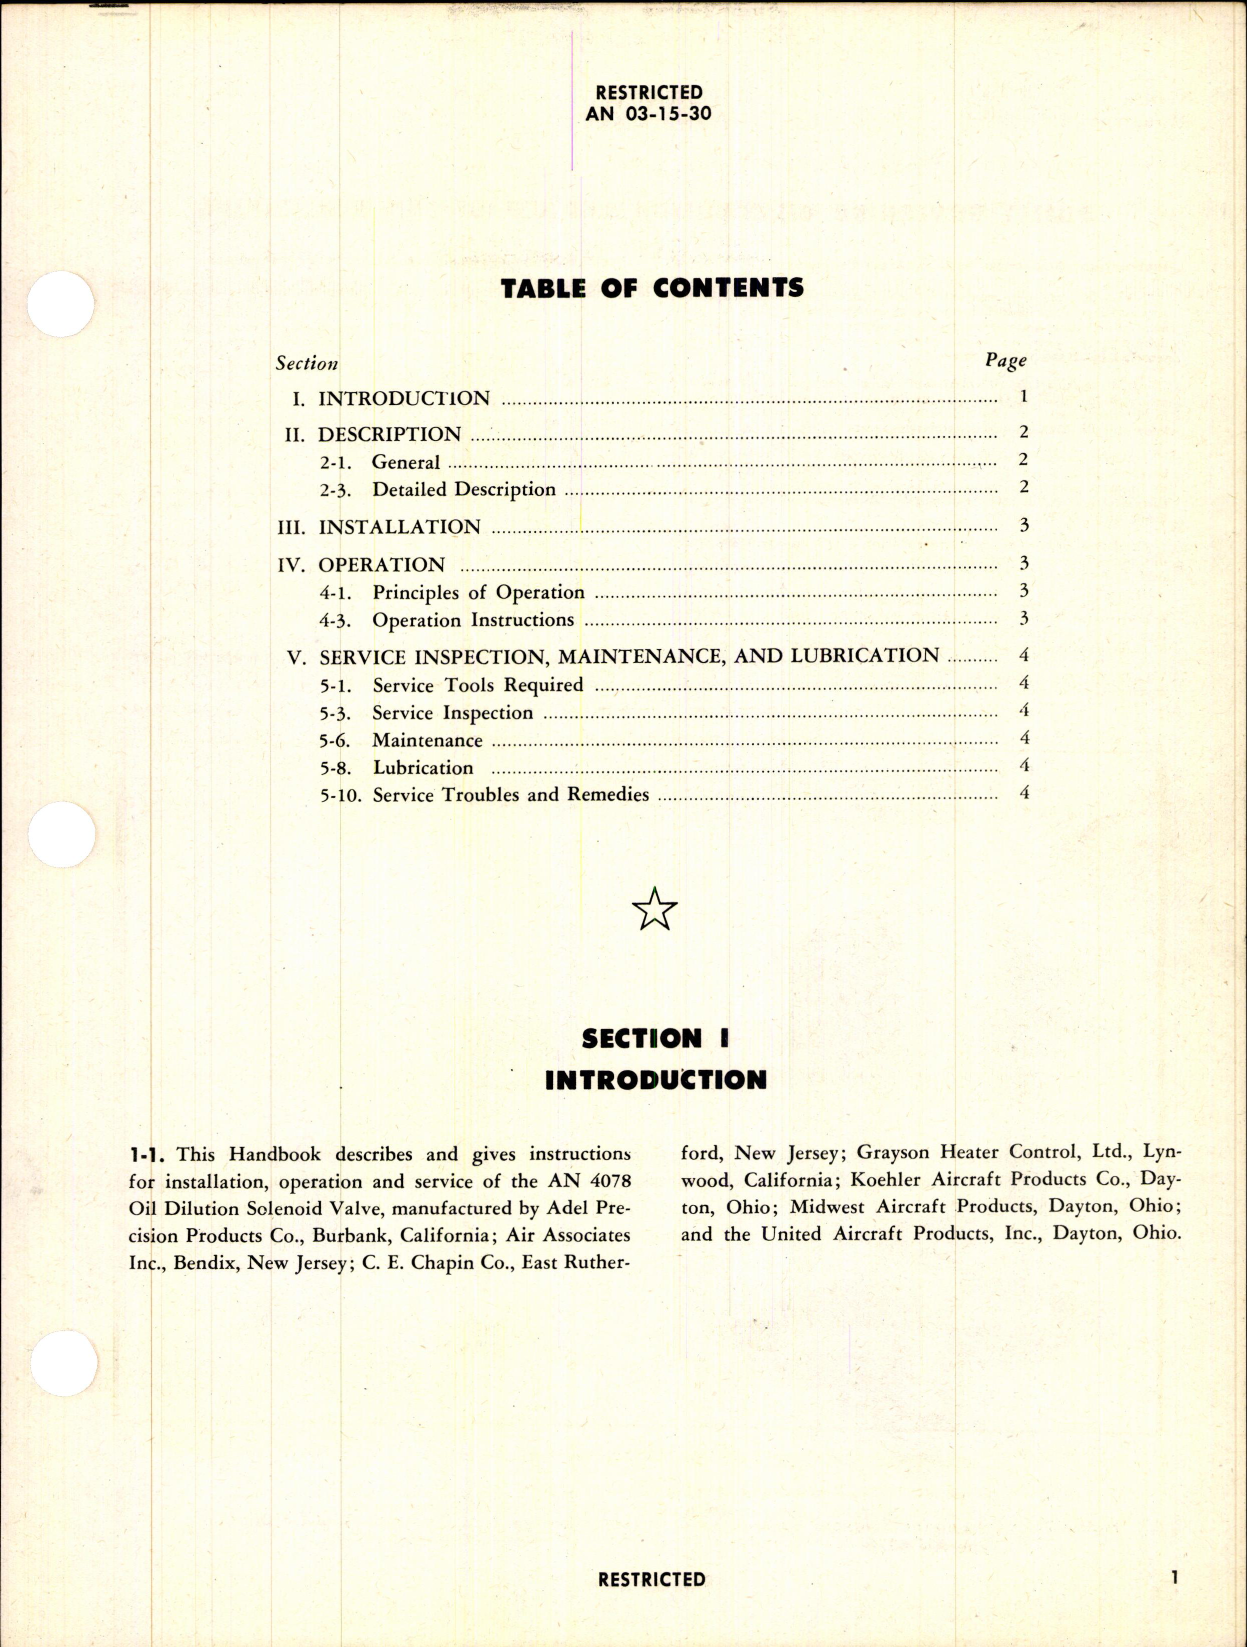 Sample page 3 from AirCorps Library document: Operation & Service Instructions for Oil Dilution Solenoid Valve Type AN 4078